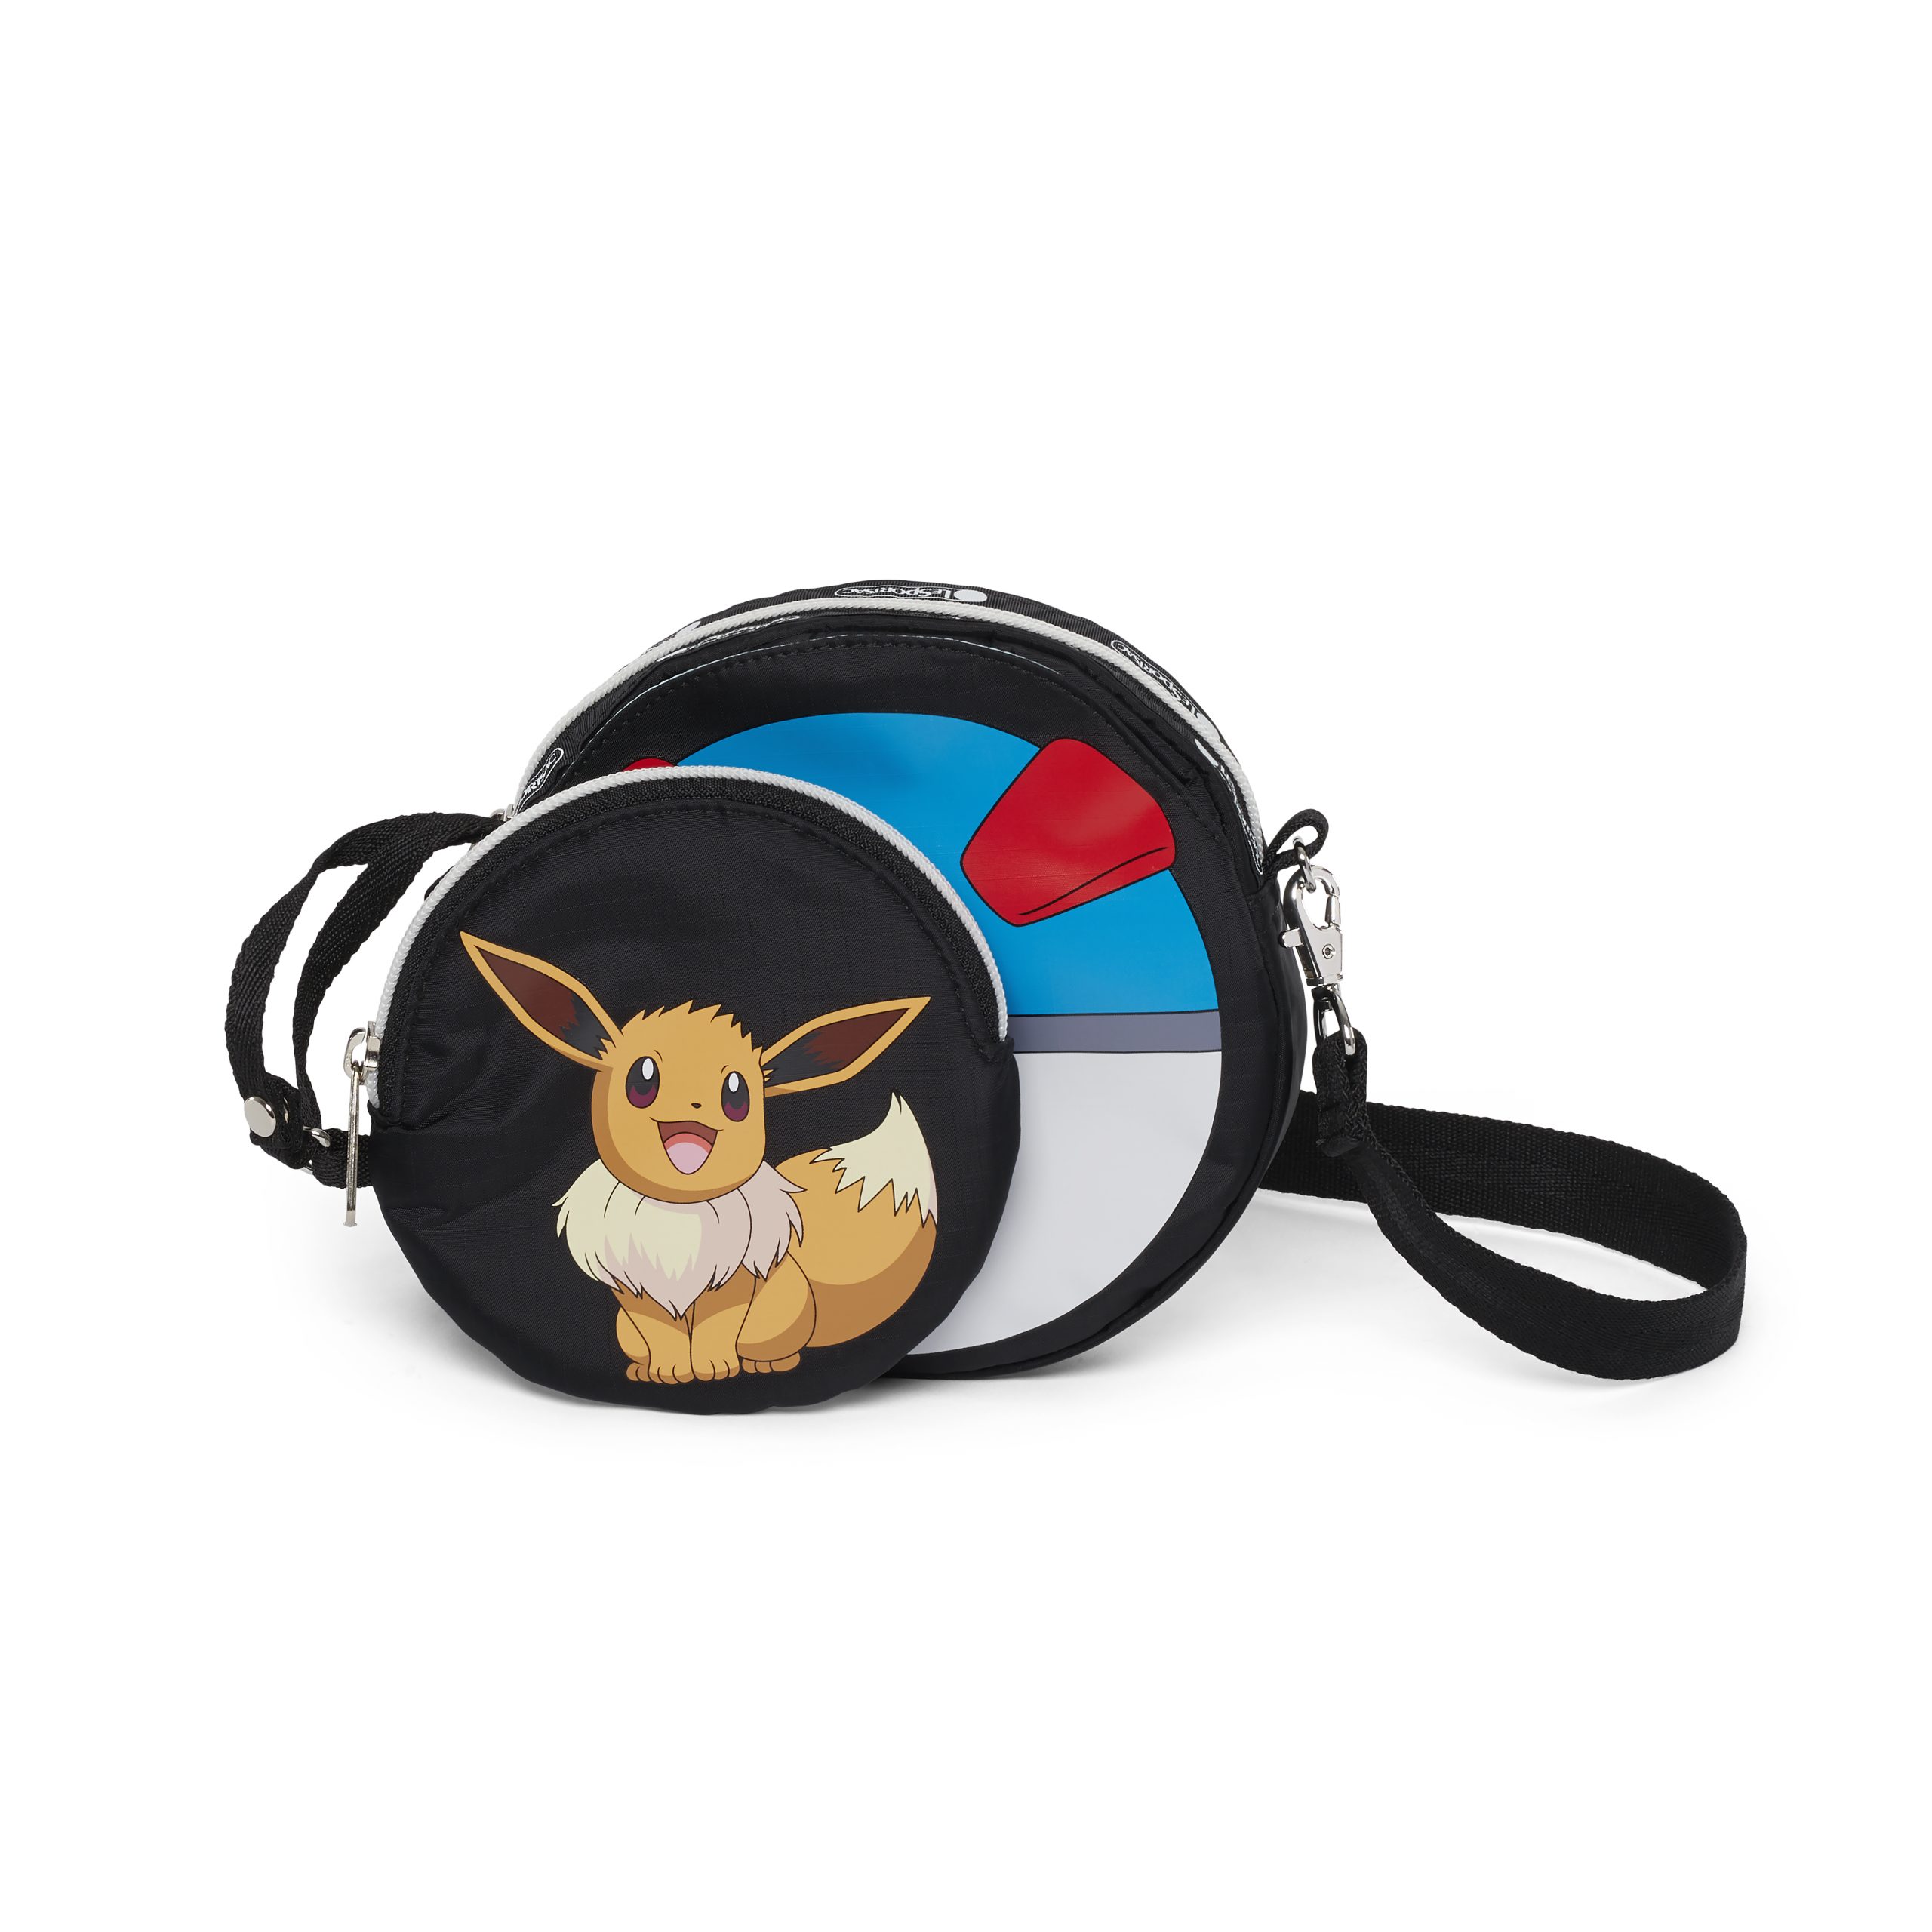 Pokemon x LeSportsac bags available in S'pore from July 4, 2020 